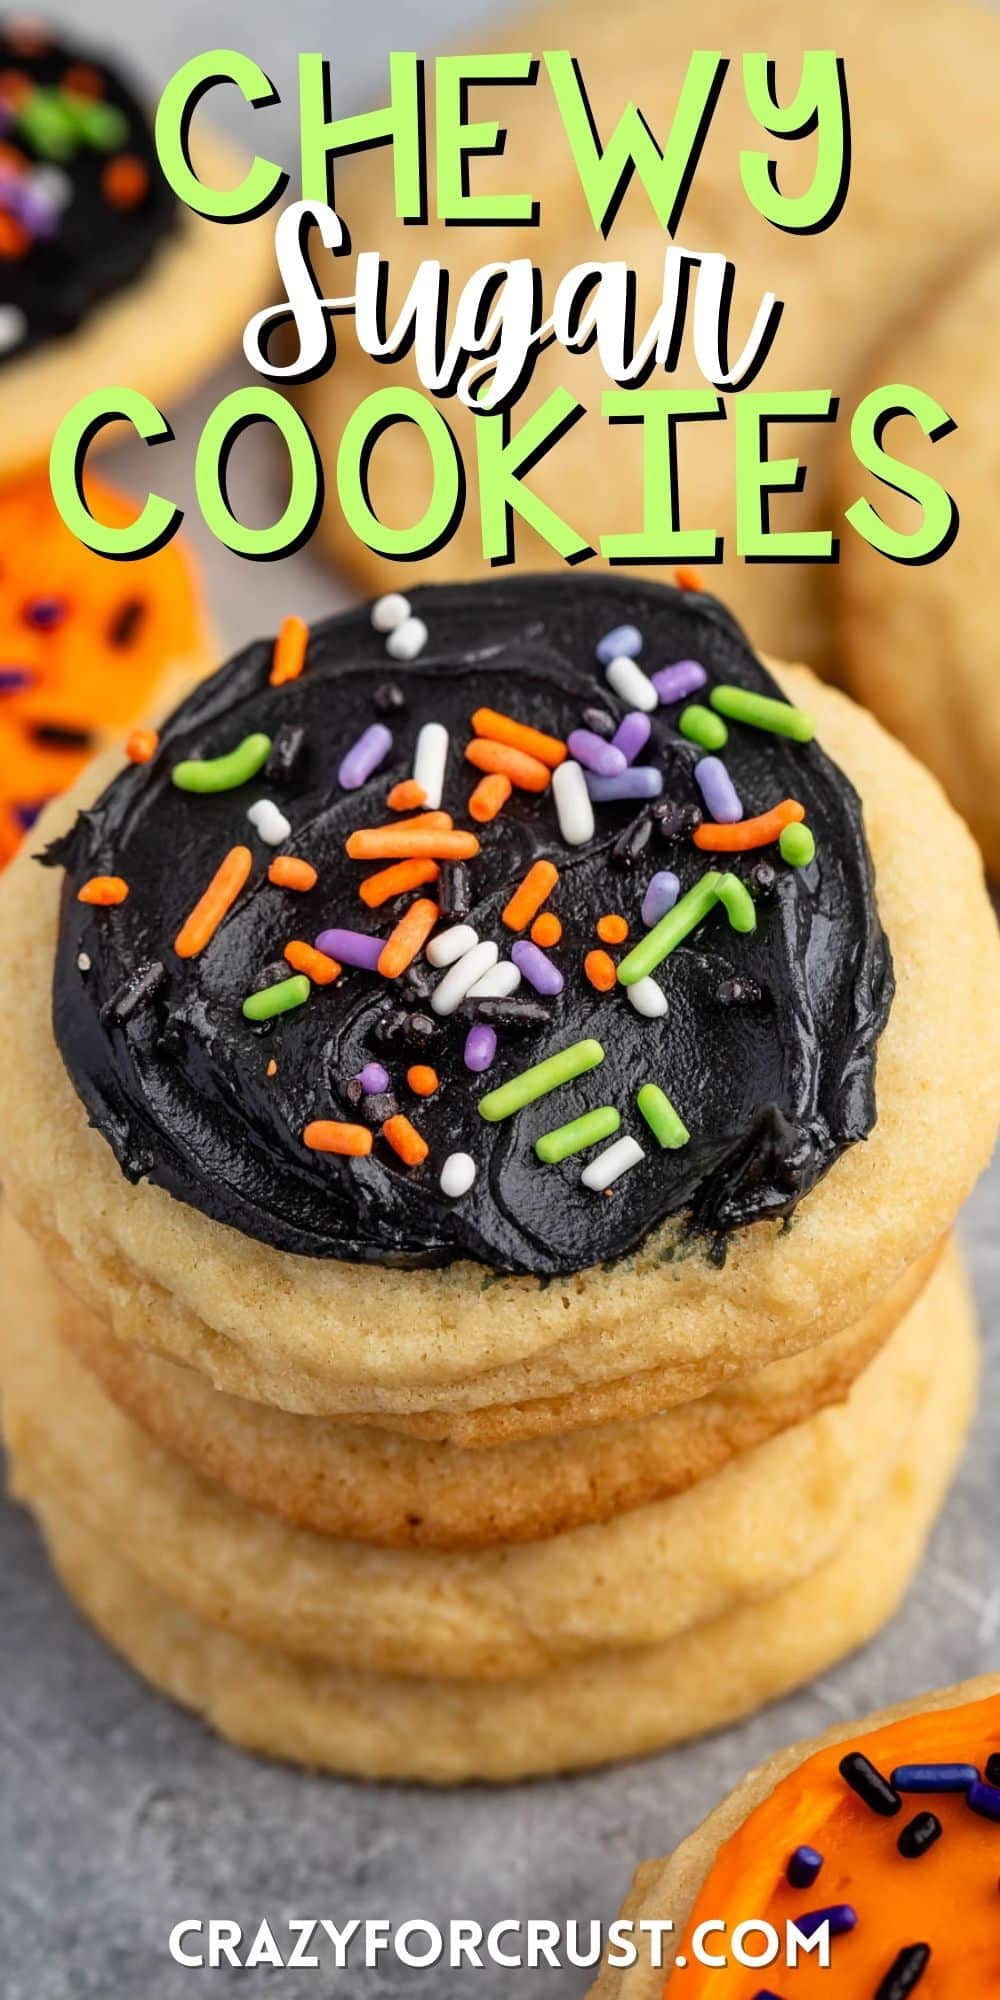 stacked sugar cookies with black frosting and orange and green sprinkles with words on the image.